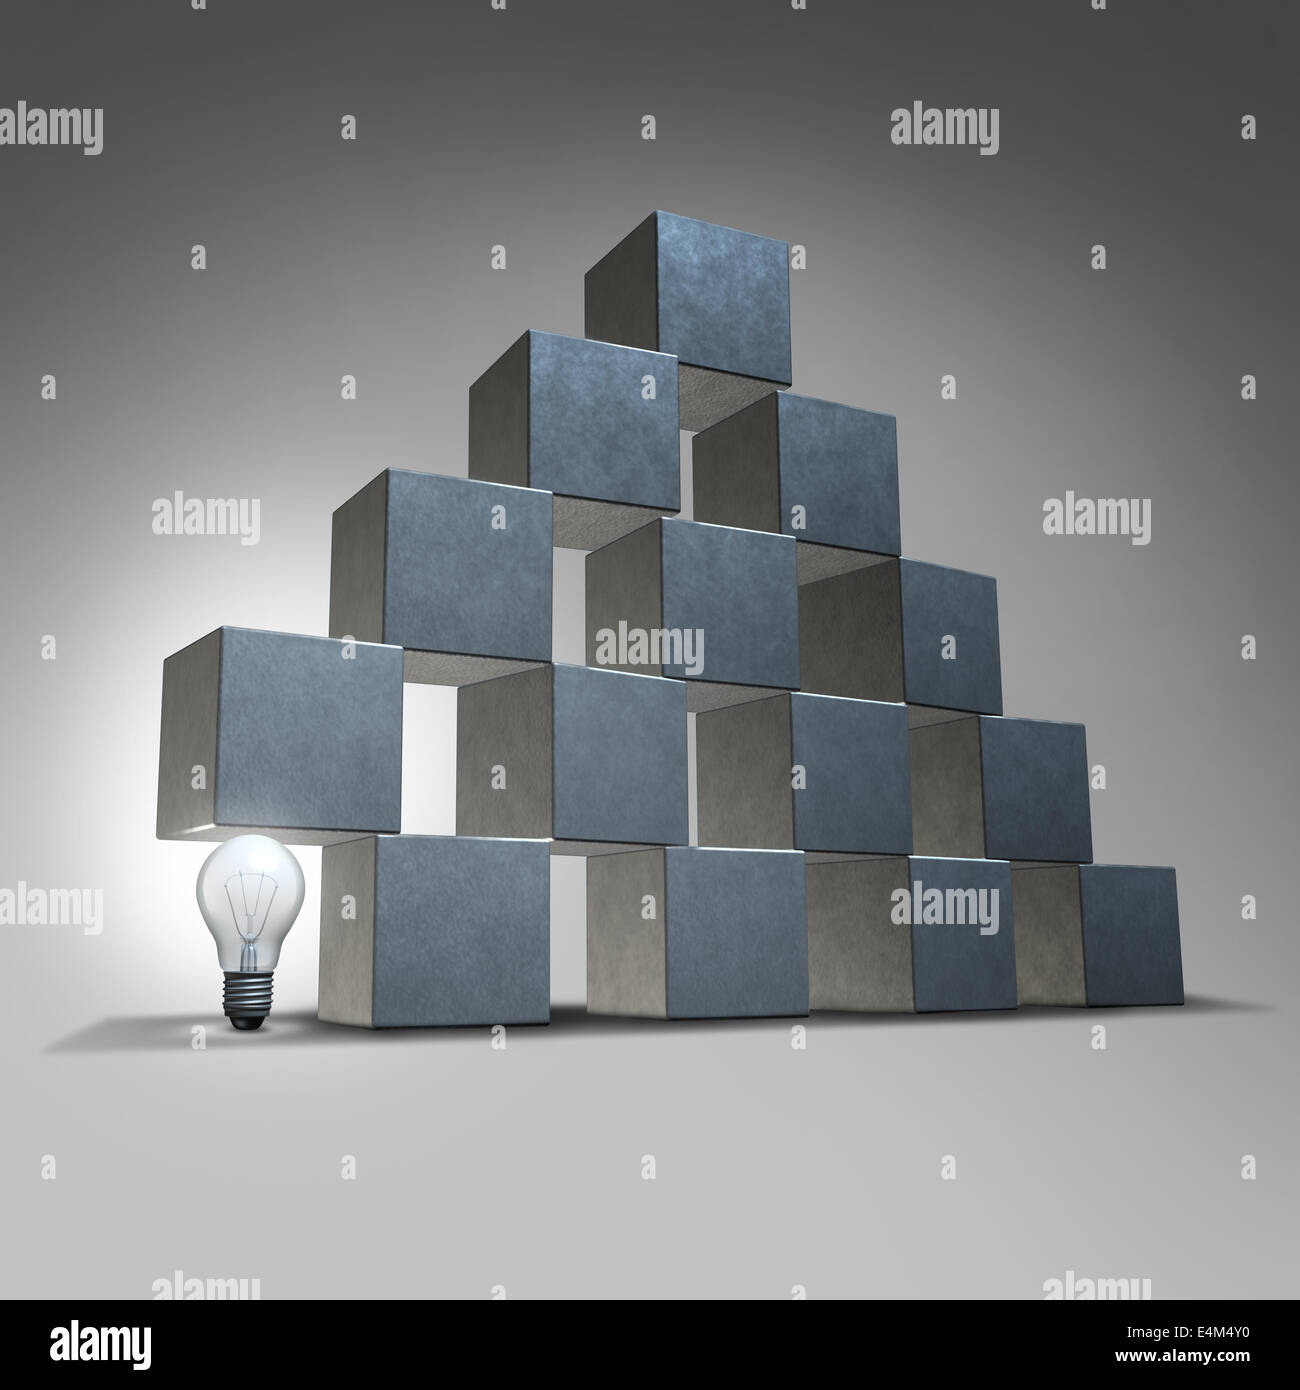 Creative support and business marketing partnership concept as a group of three dimensional cubes being supported by an illumina Stock Photo